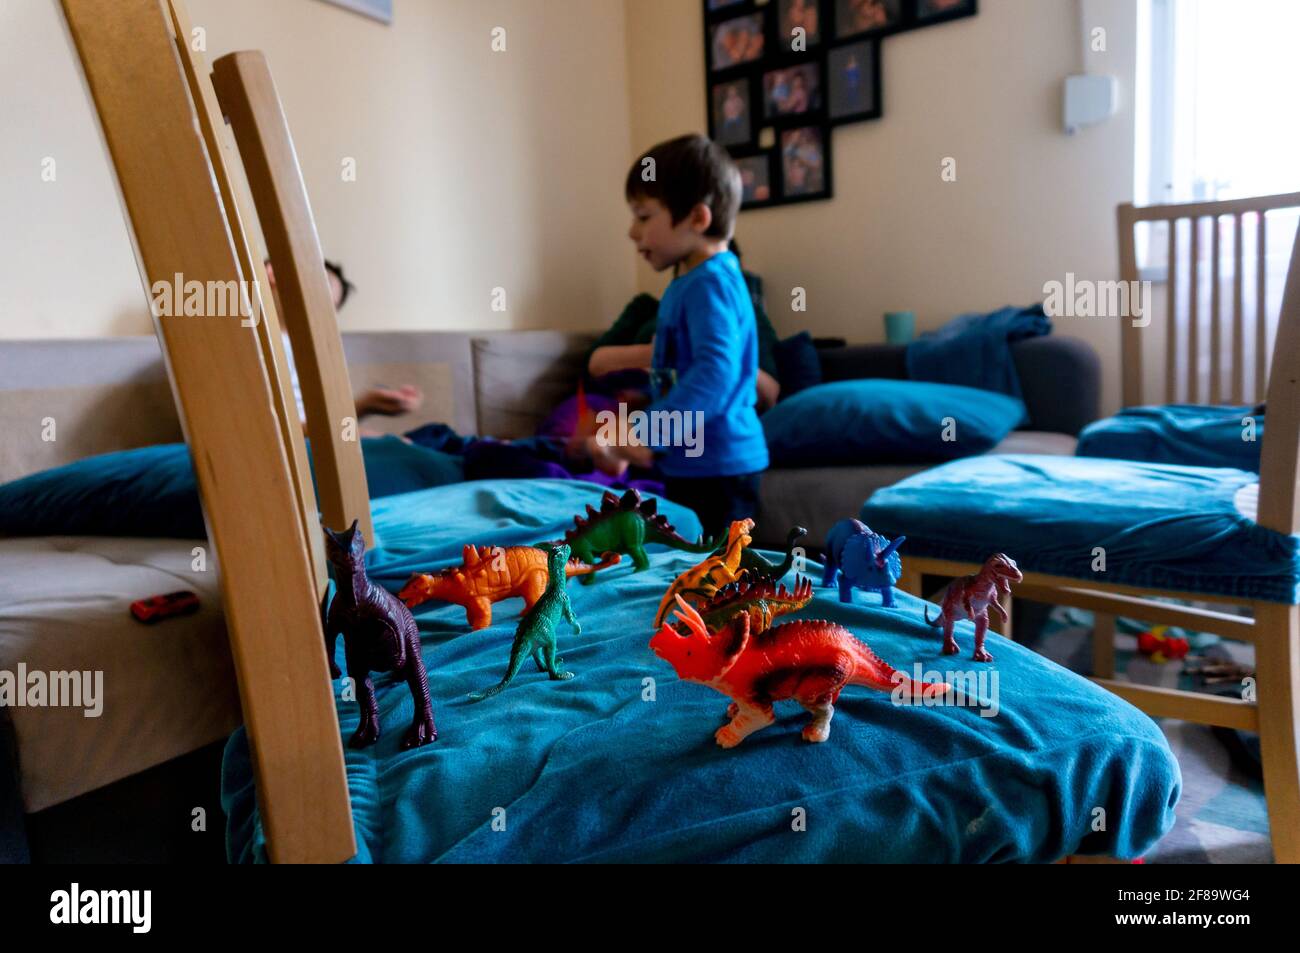 POZNAN, POLAND - Apr 10, 2021: Mix of dinosaur figurines on a chair in a living room of a Polish home. Stock Photo